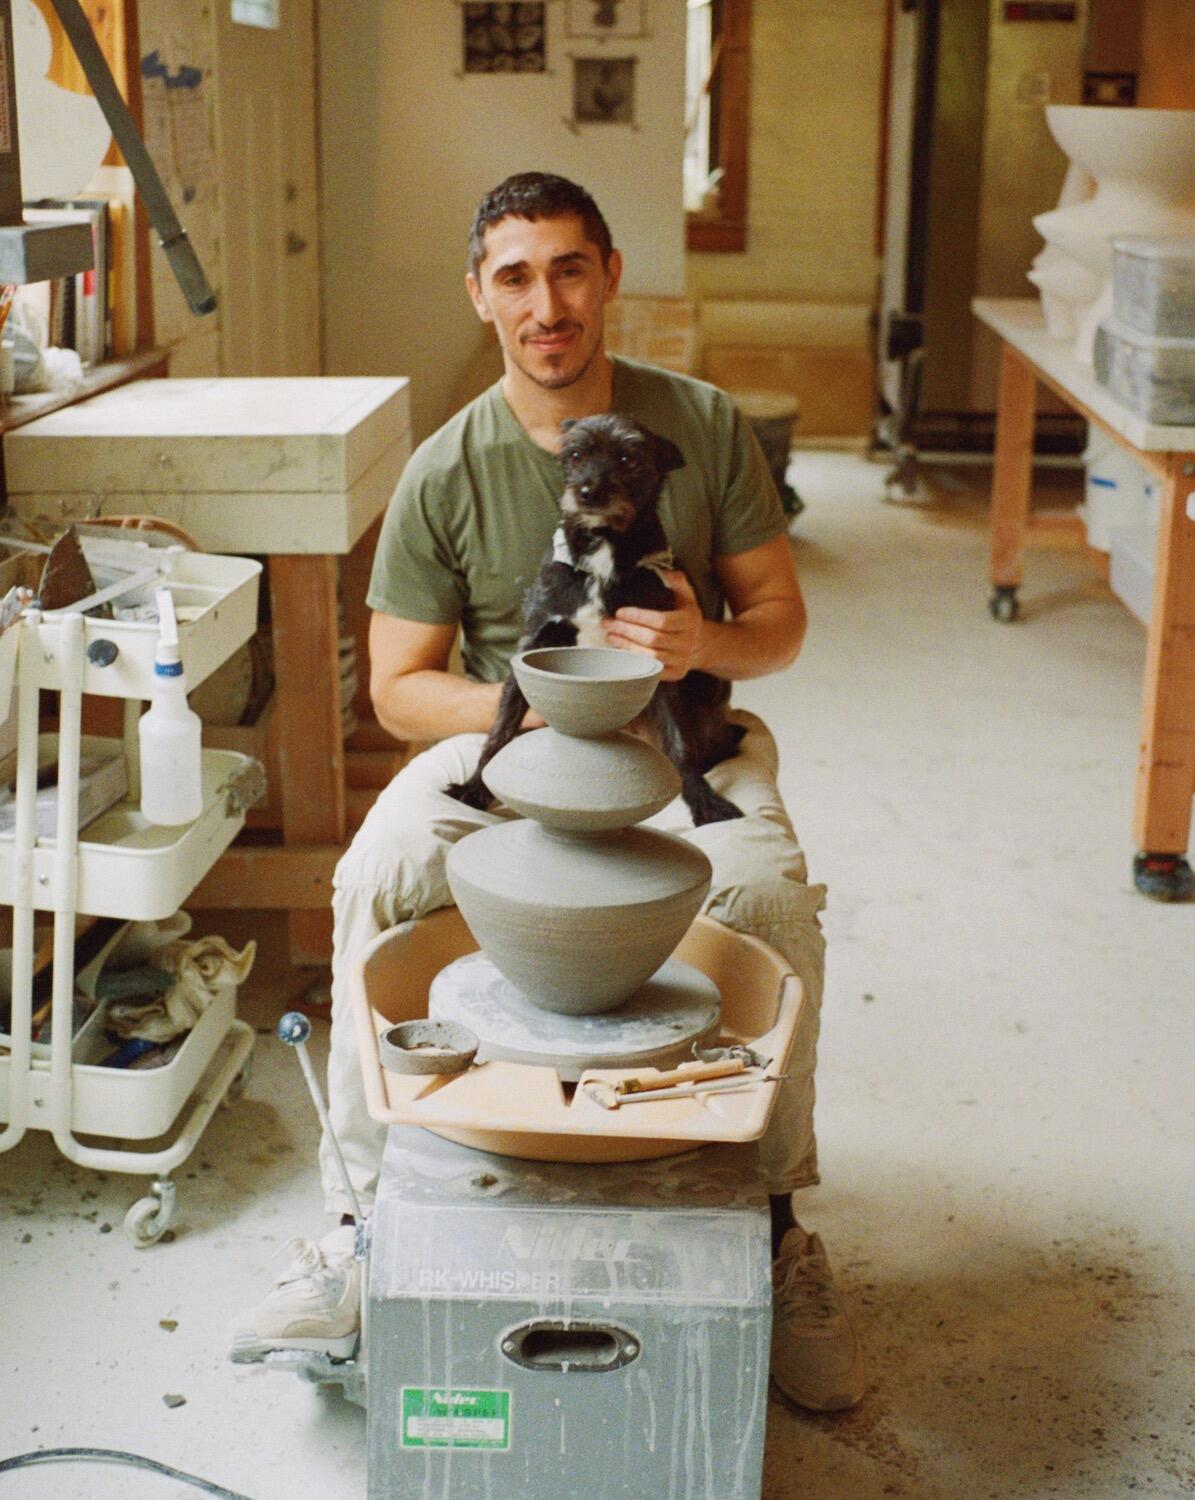 This ceramist is striving to blend beauty with utility